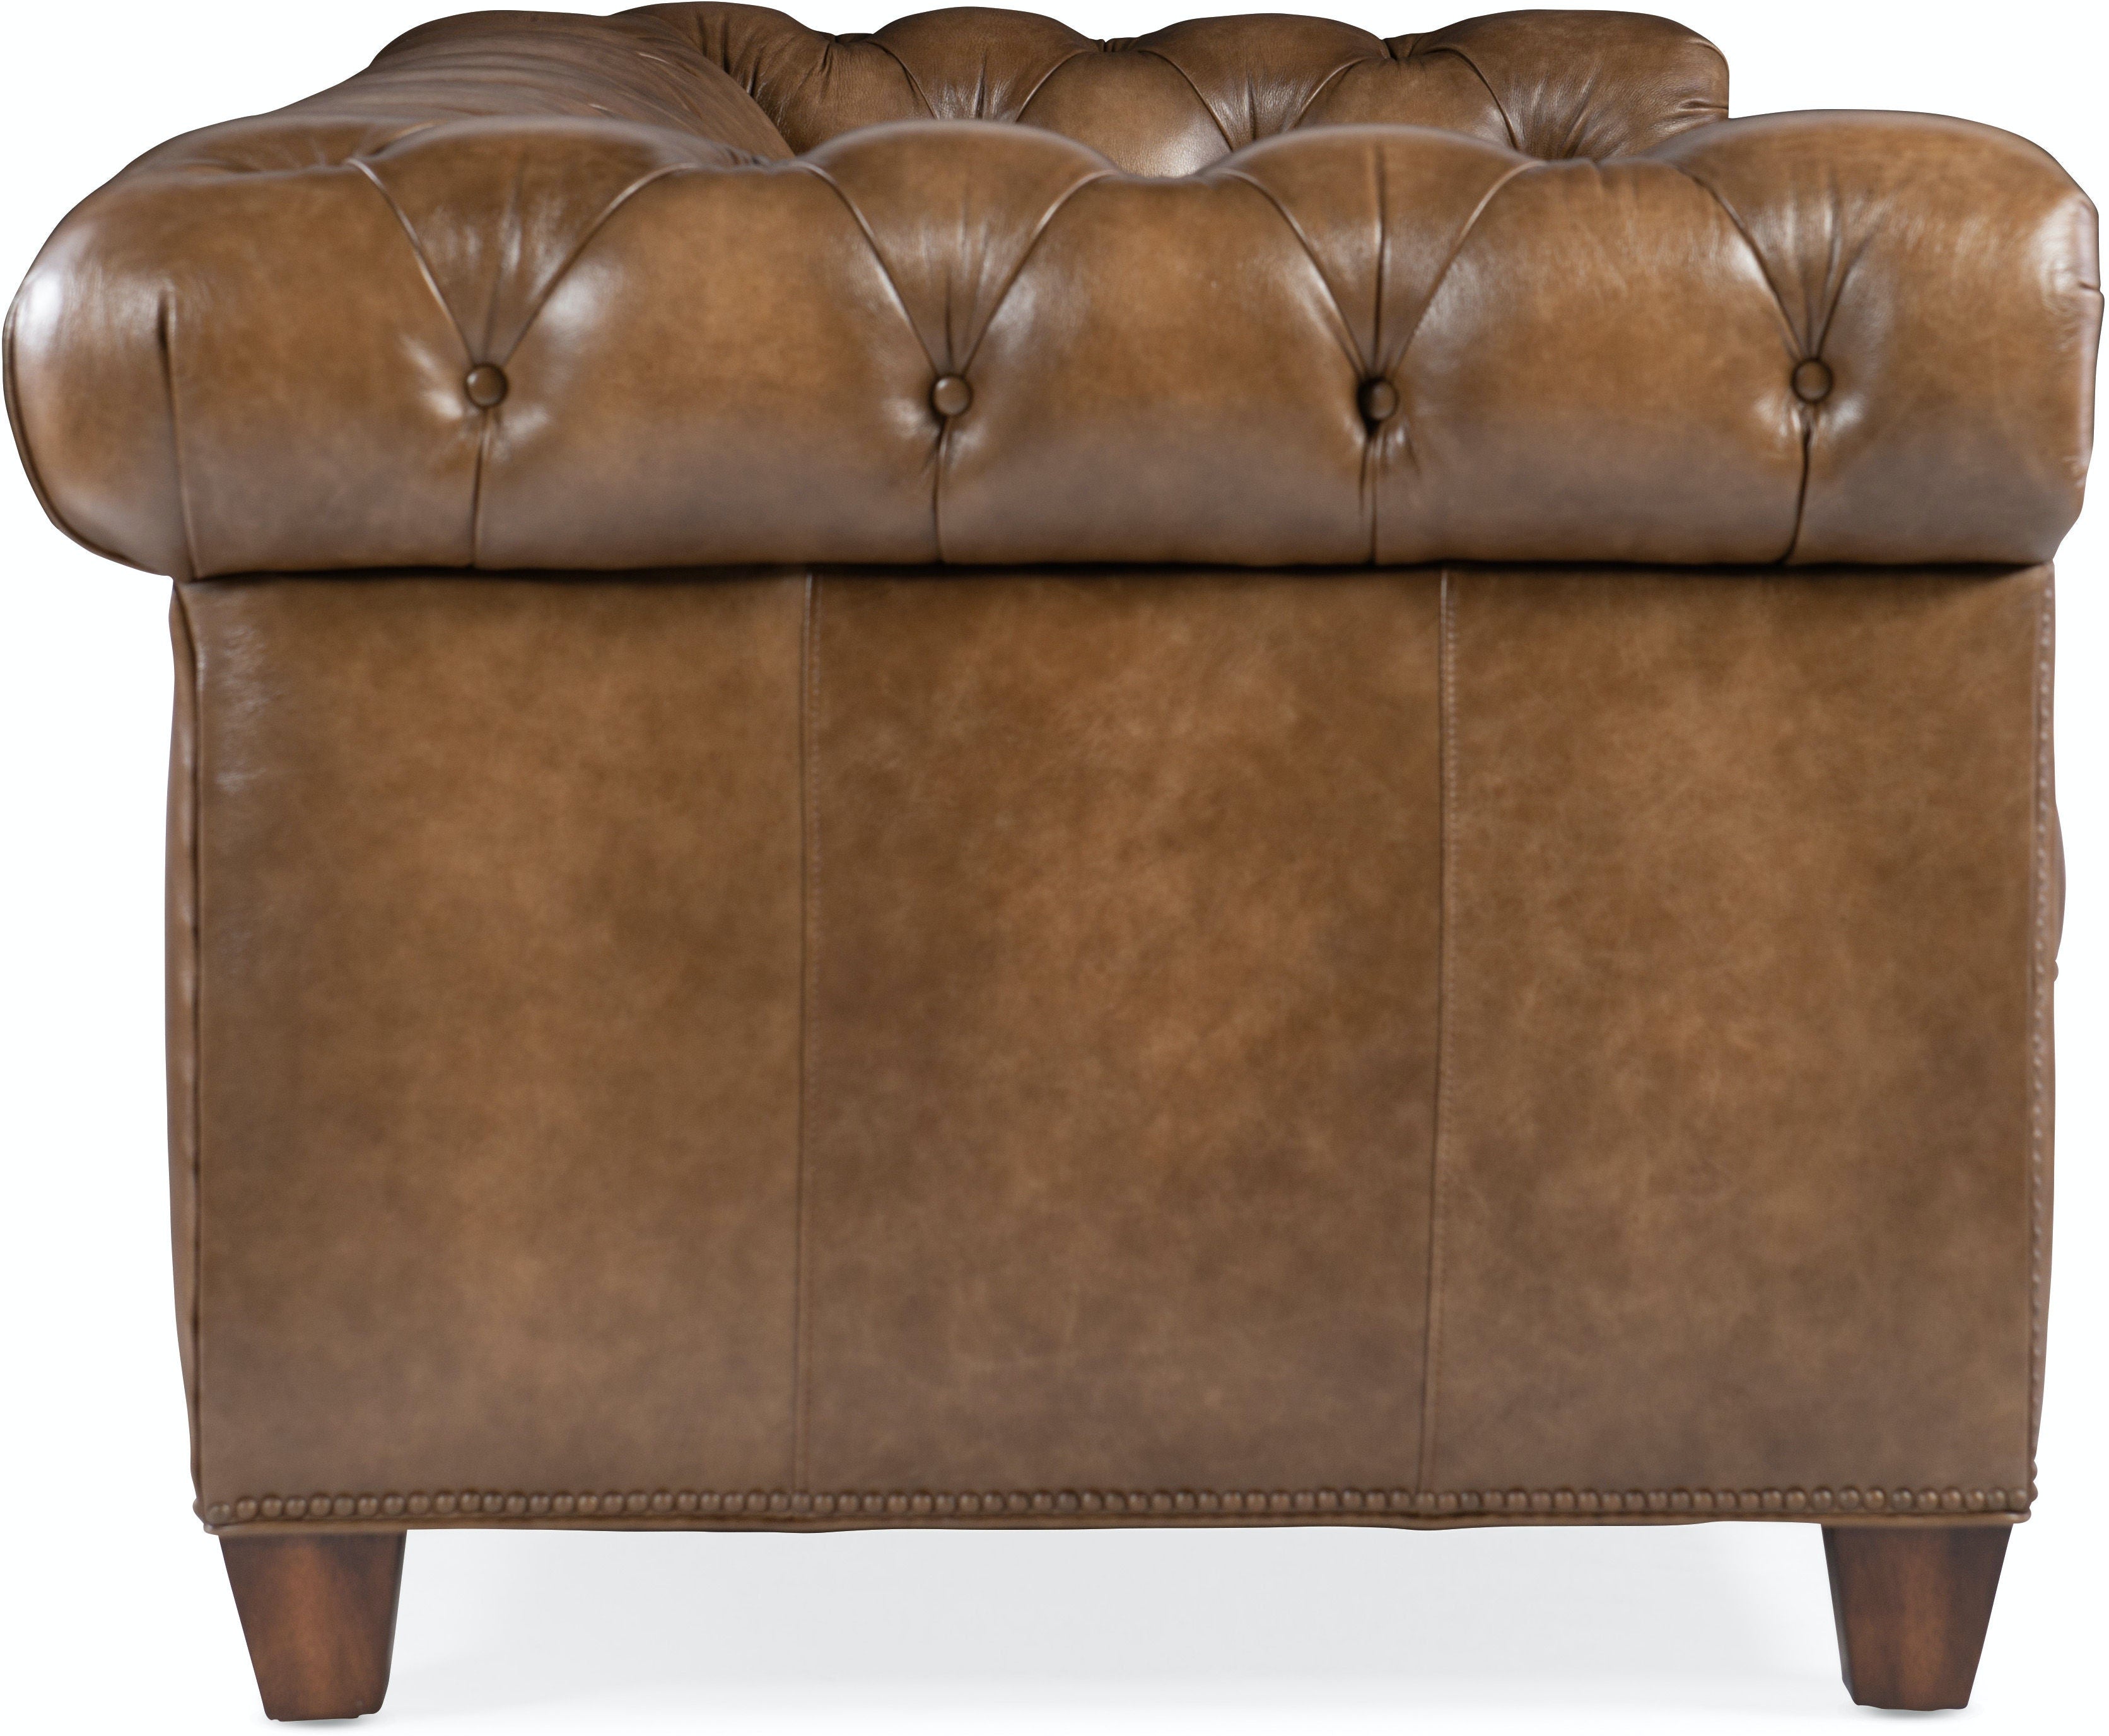 Hooker Furniture Living Room Chester Tufted Tianran Nature Stationary Sofa